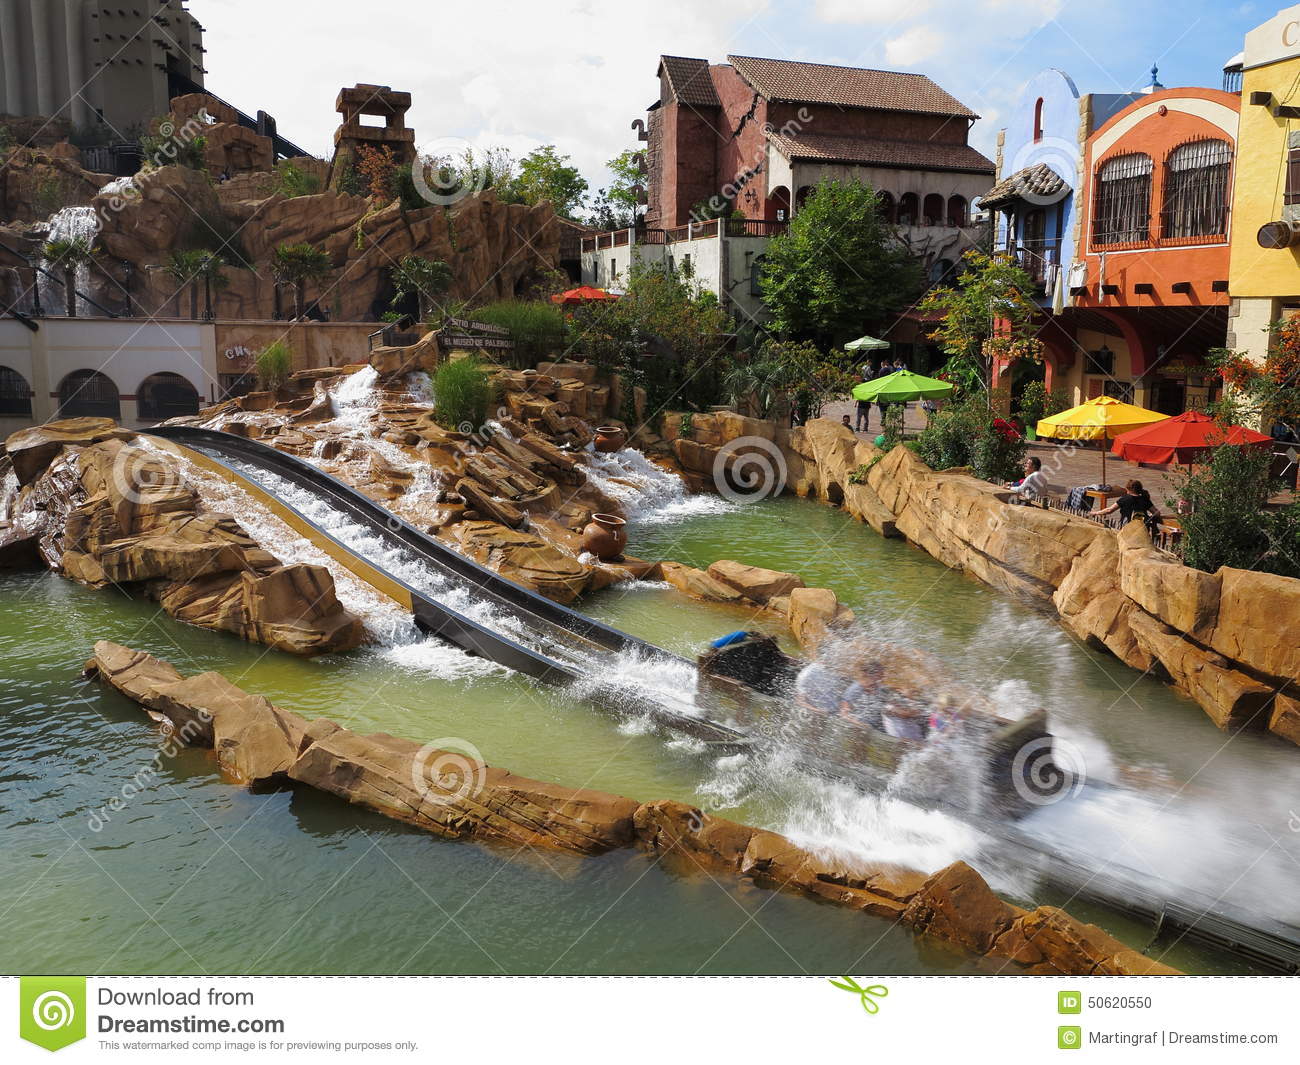 Log Flume Ride  Chiapas In Phantasialand Germany  And People Relaxing